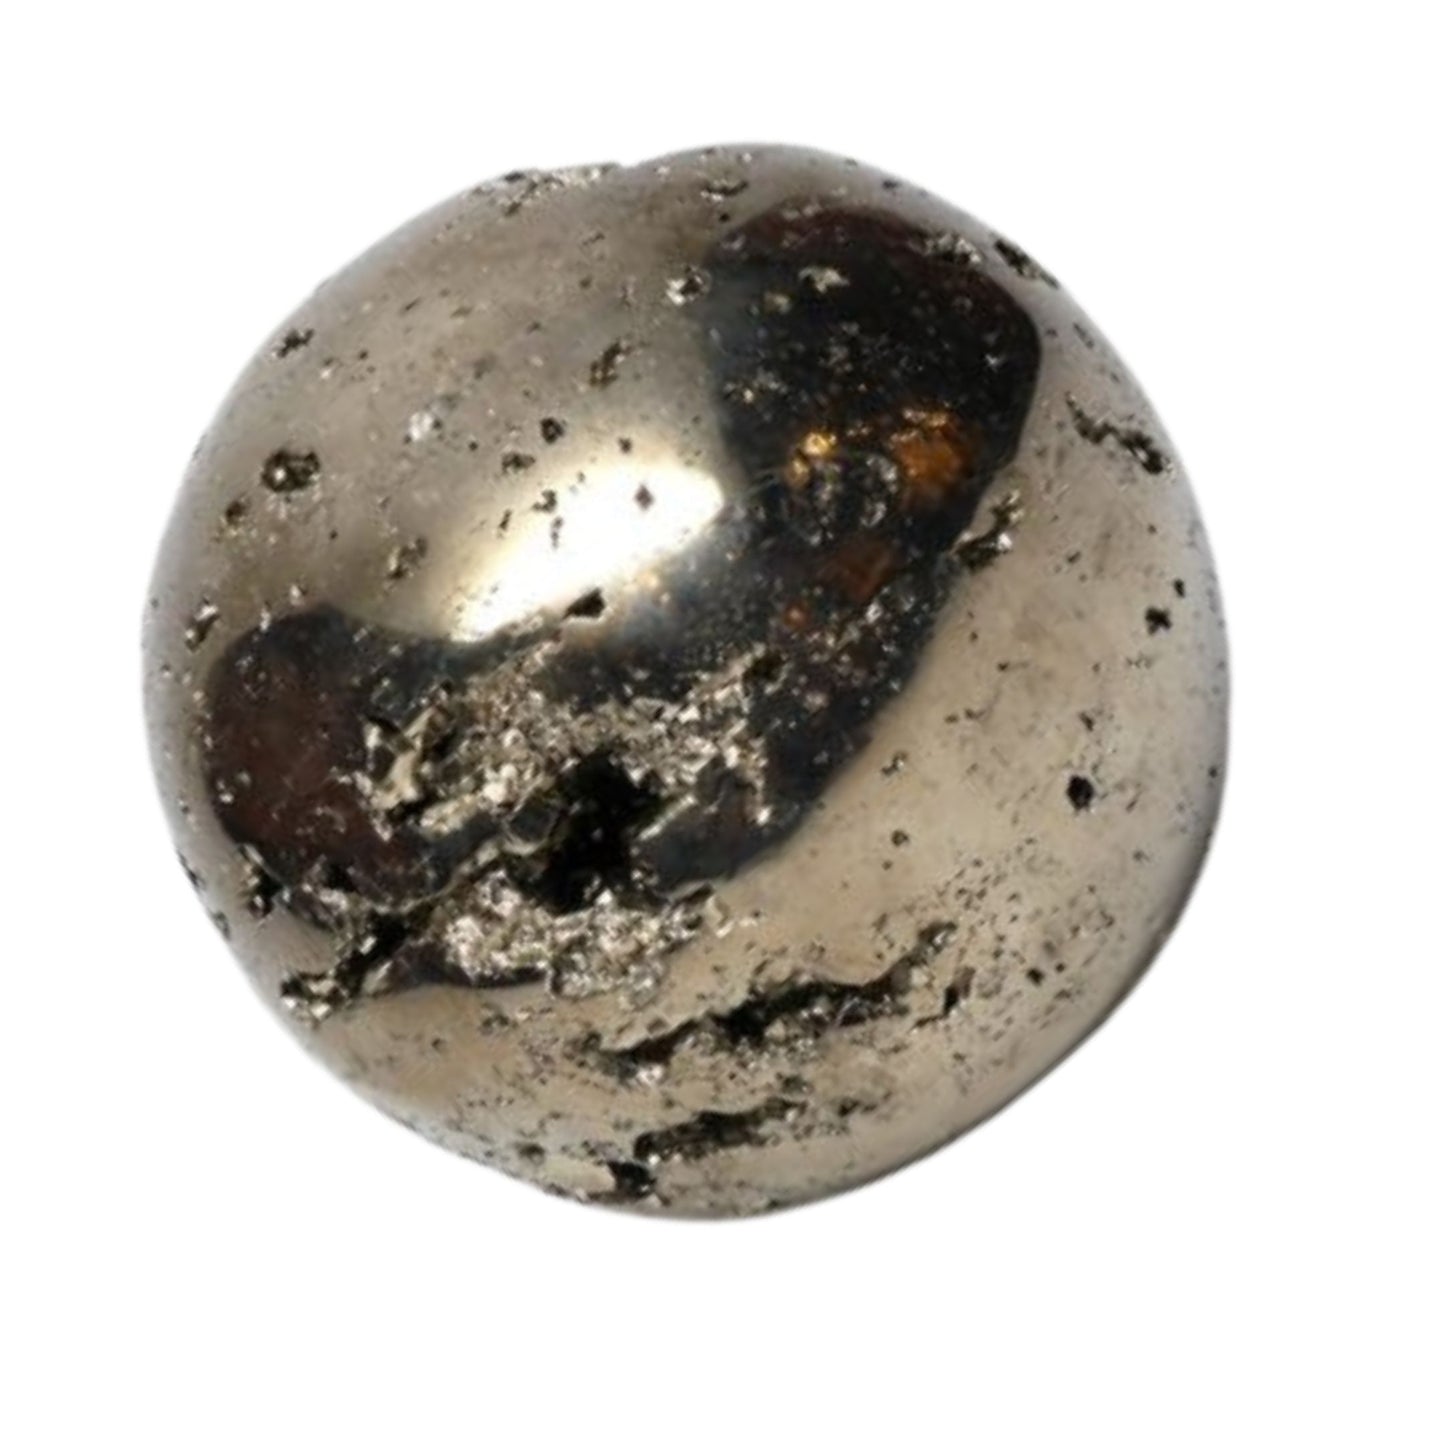 PYRITE SPHERE FOR ATTRACTING MONEY